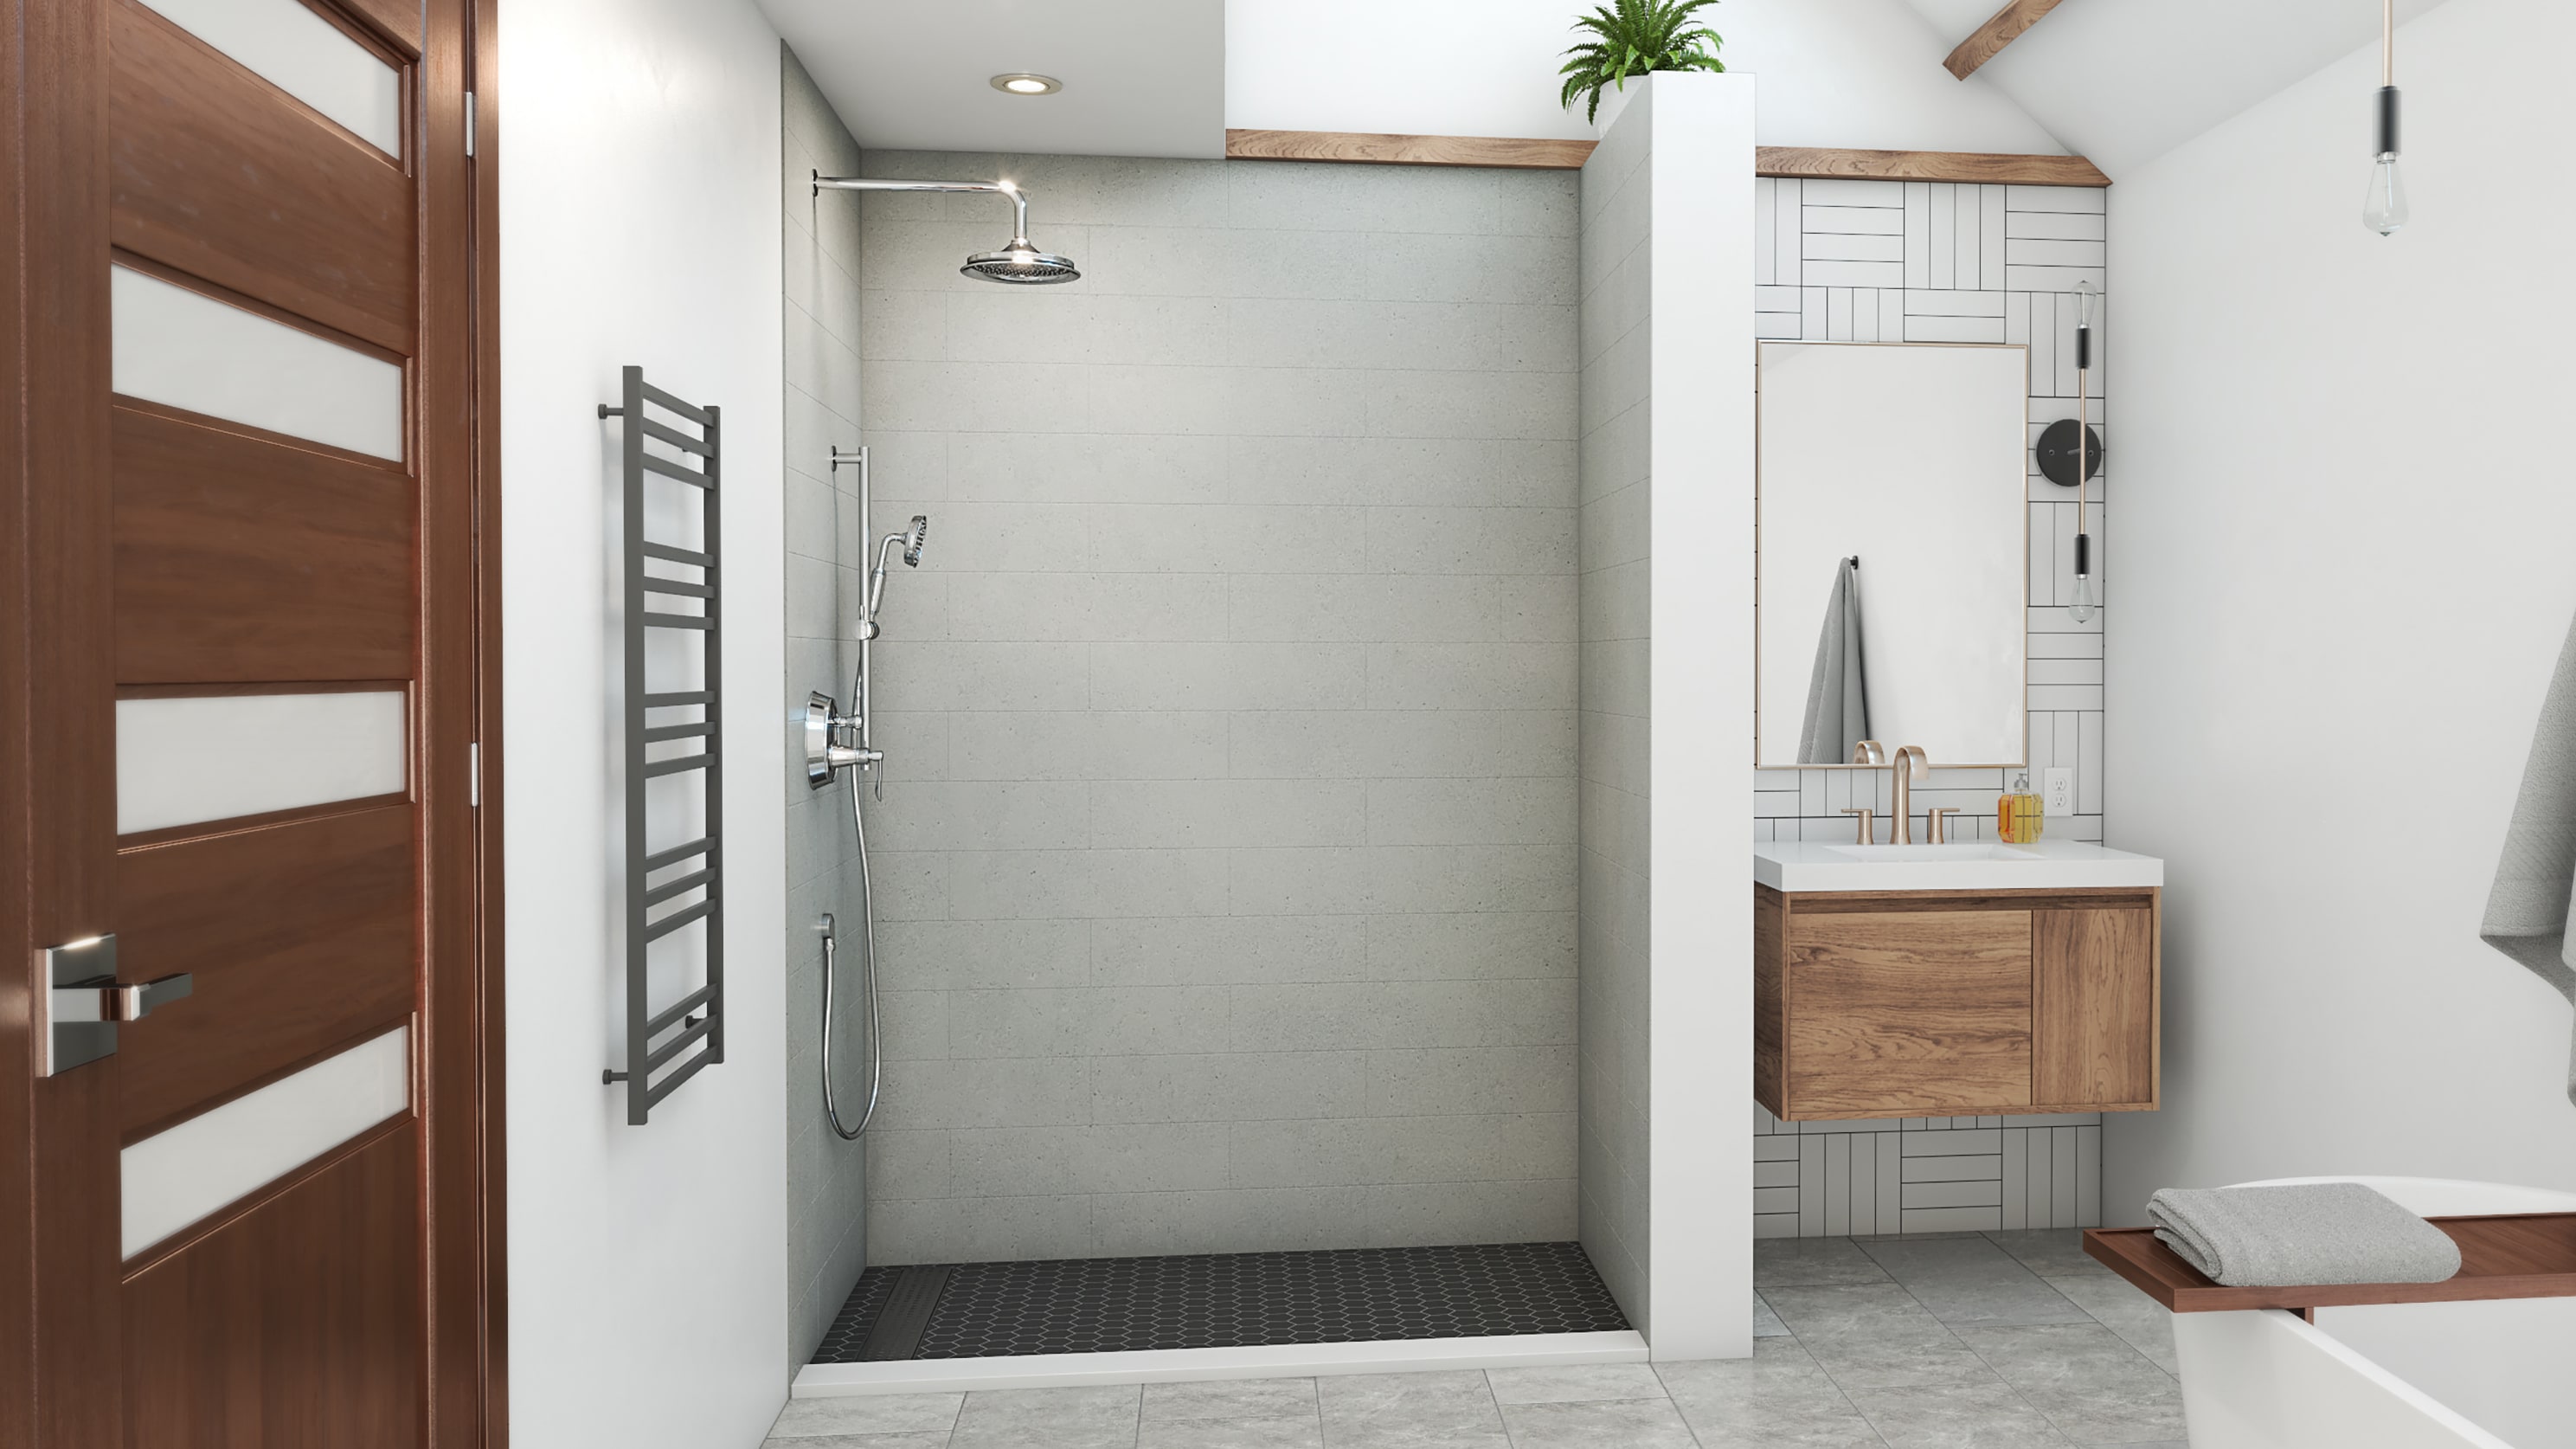 http://res.cloudinary.com/american-bath-group/image/upload/v1667516305/websites-product-info-and-content/swan/content/products/bathroom/shower-walls/swan-shower-walls-swanstone-collections.jpg